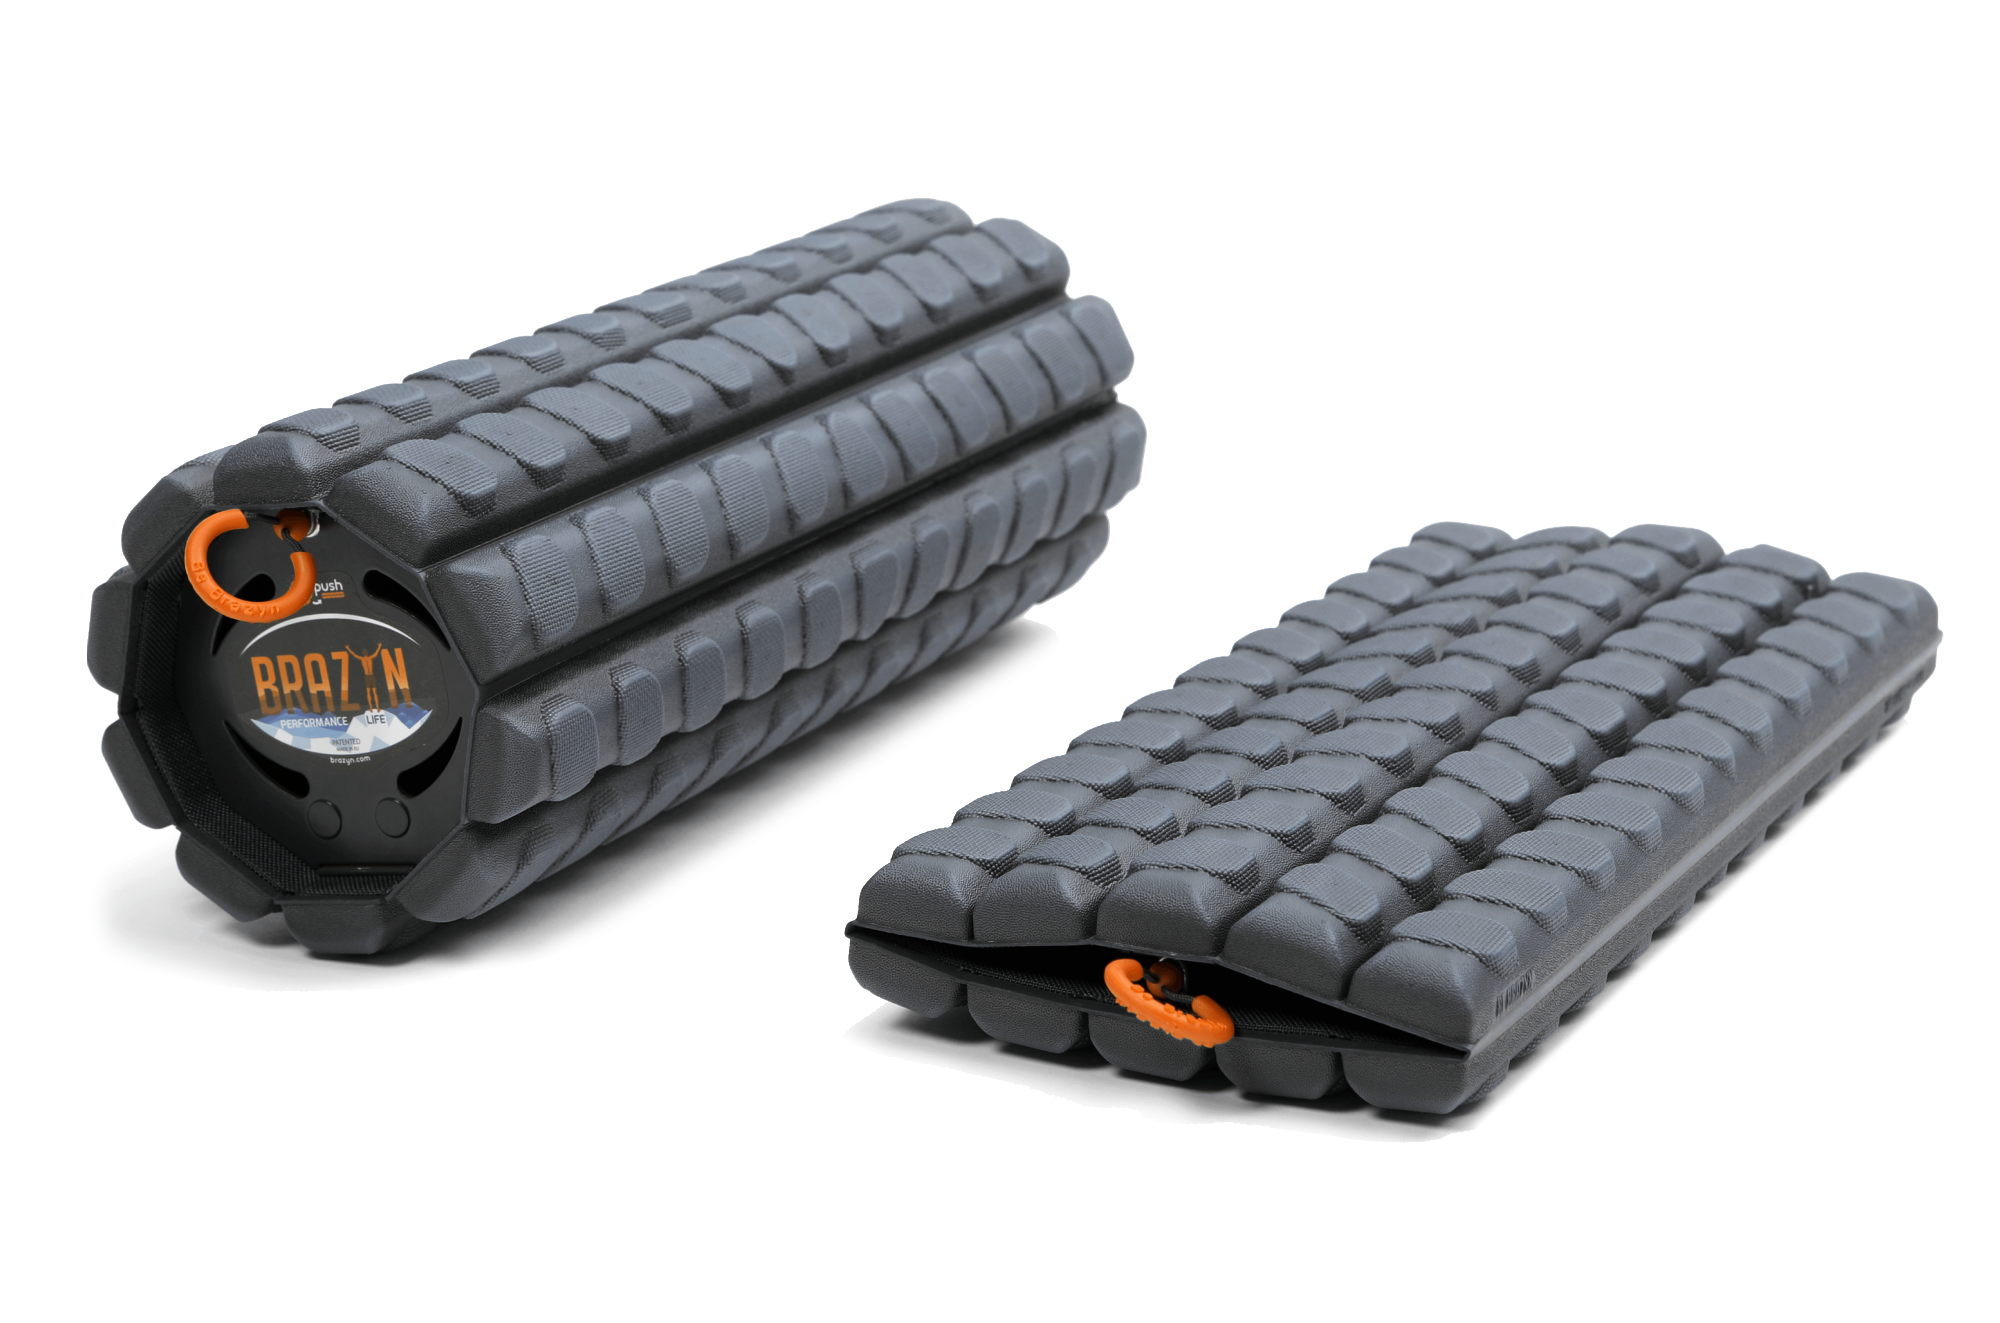 Foam Rolling 101, Workout and Recovery Equipment